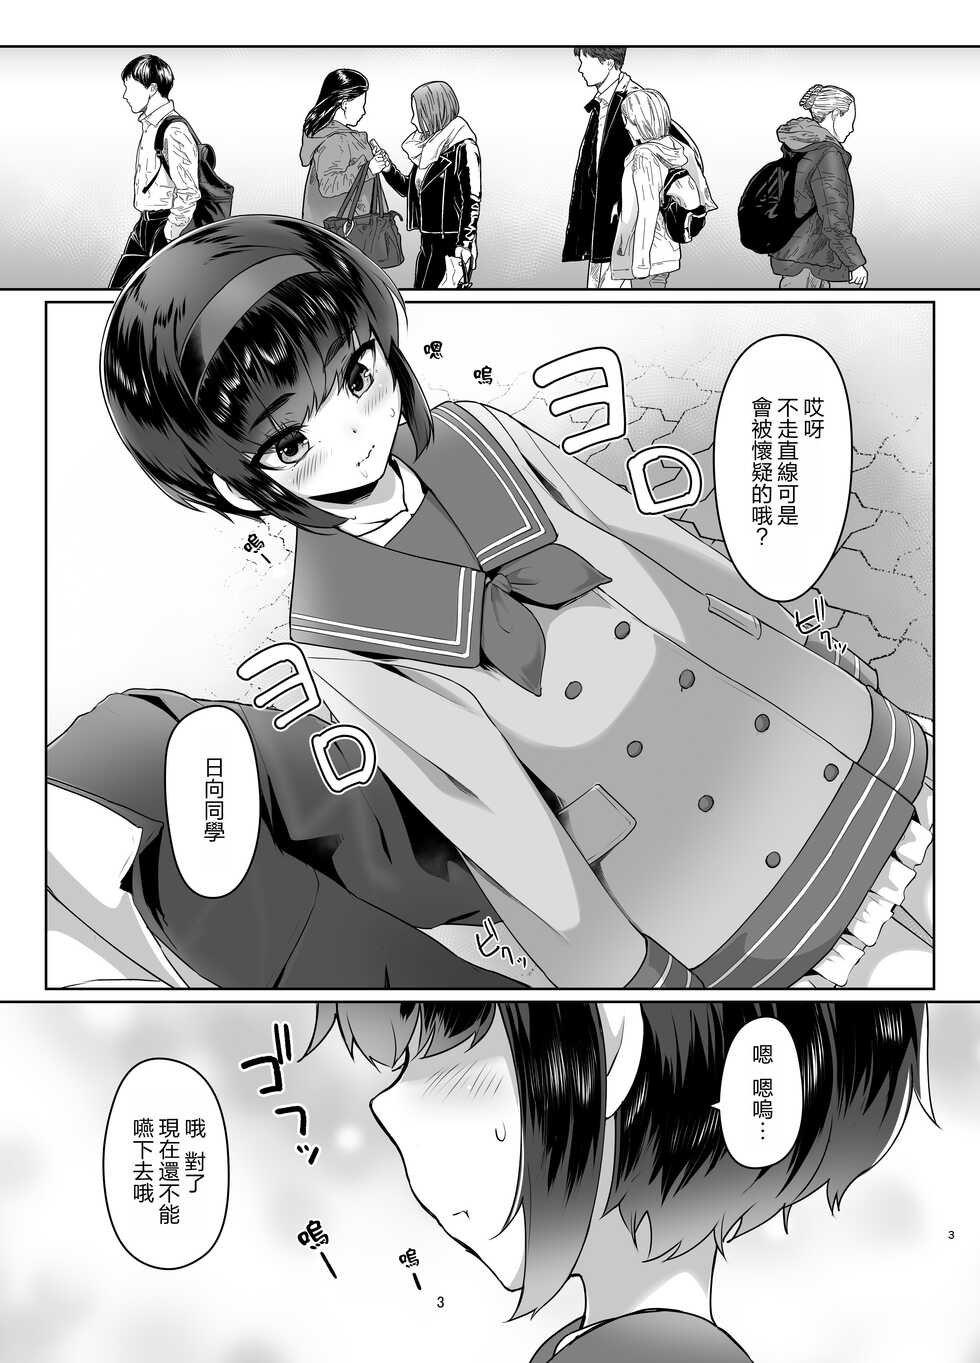 [face to face (ryoattoryo)] Tooi Hinata 2 [Chinese] [AX個人漢化] [Digital] - Page 3